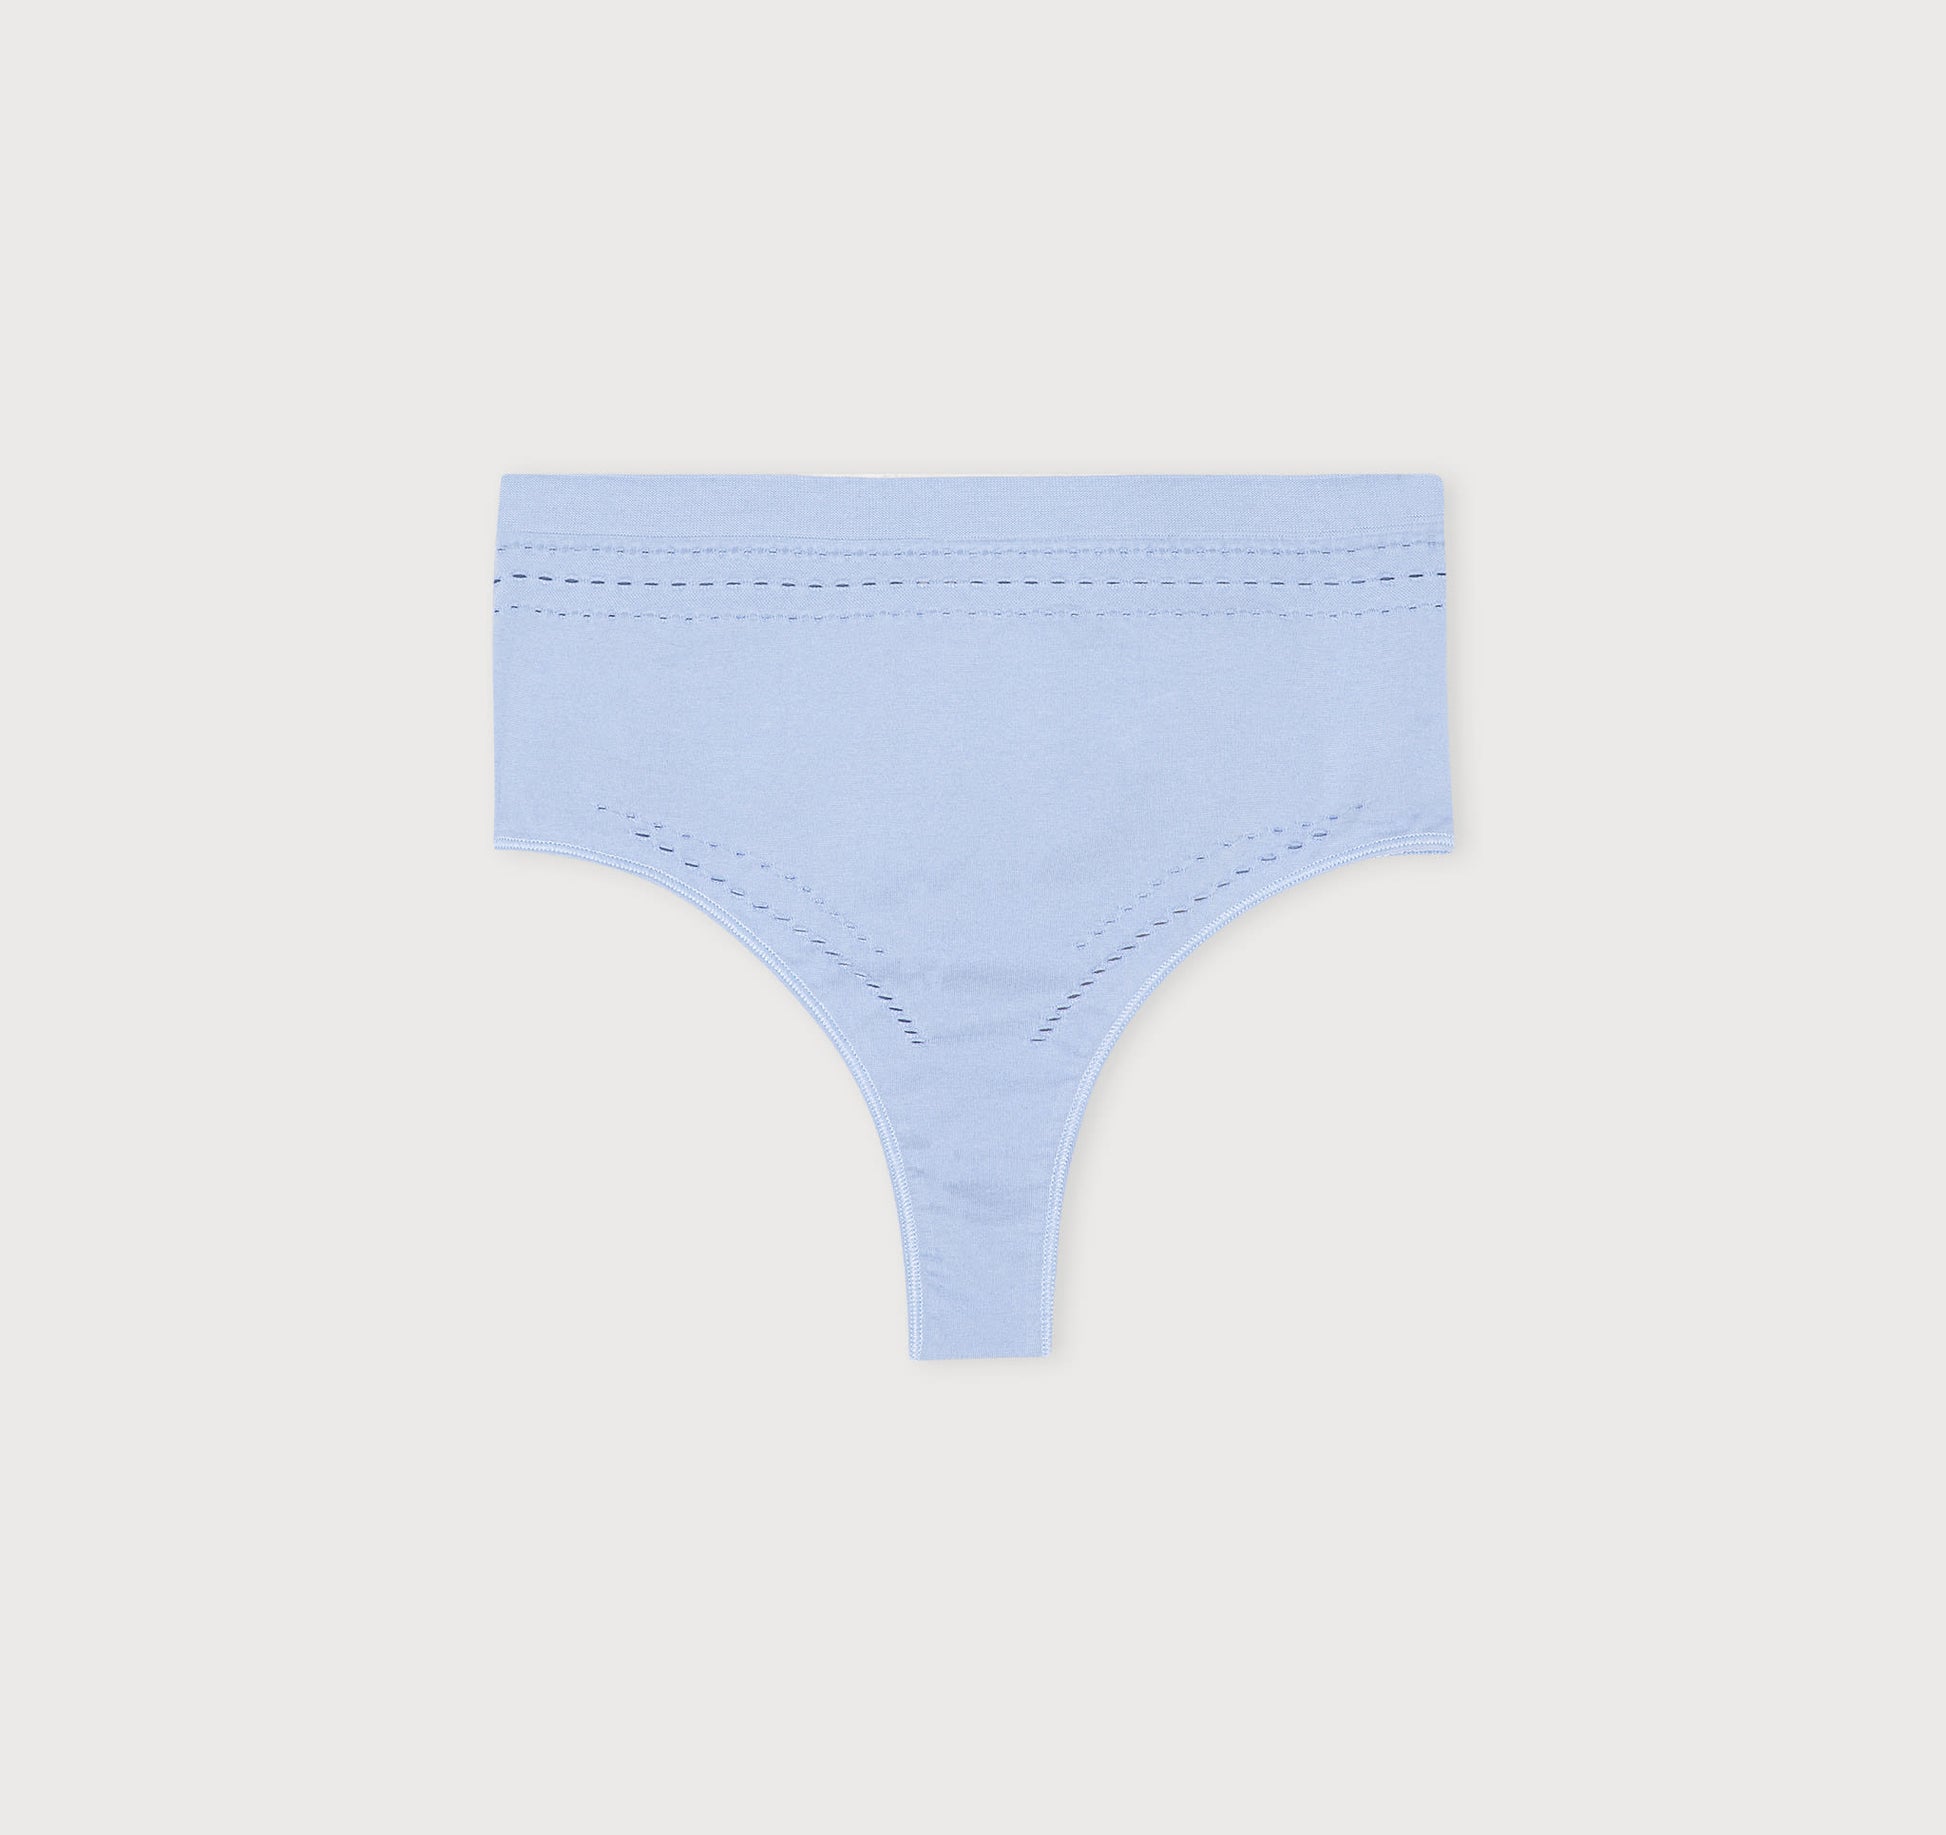 Cotton:On seamless high cut thong in blue